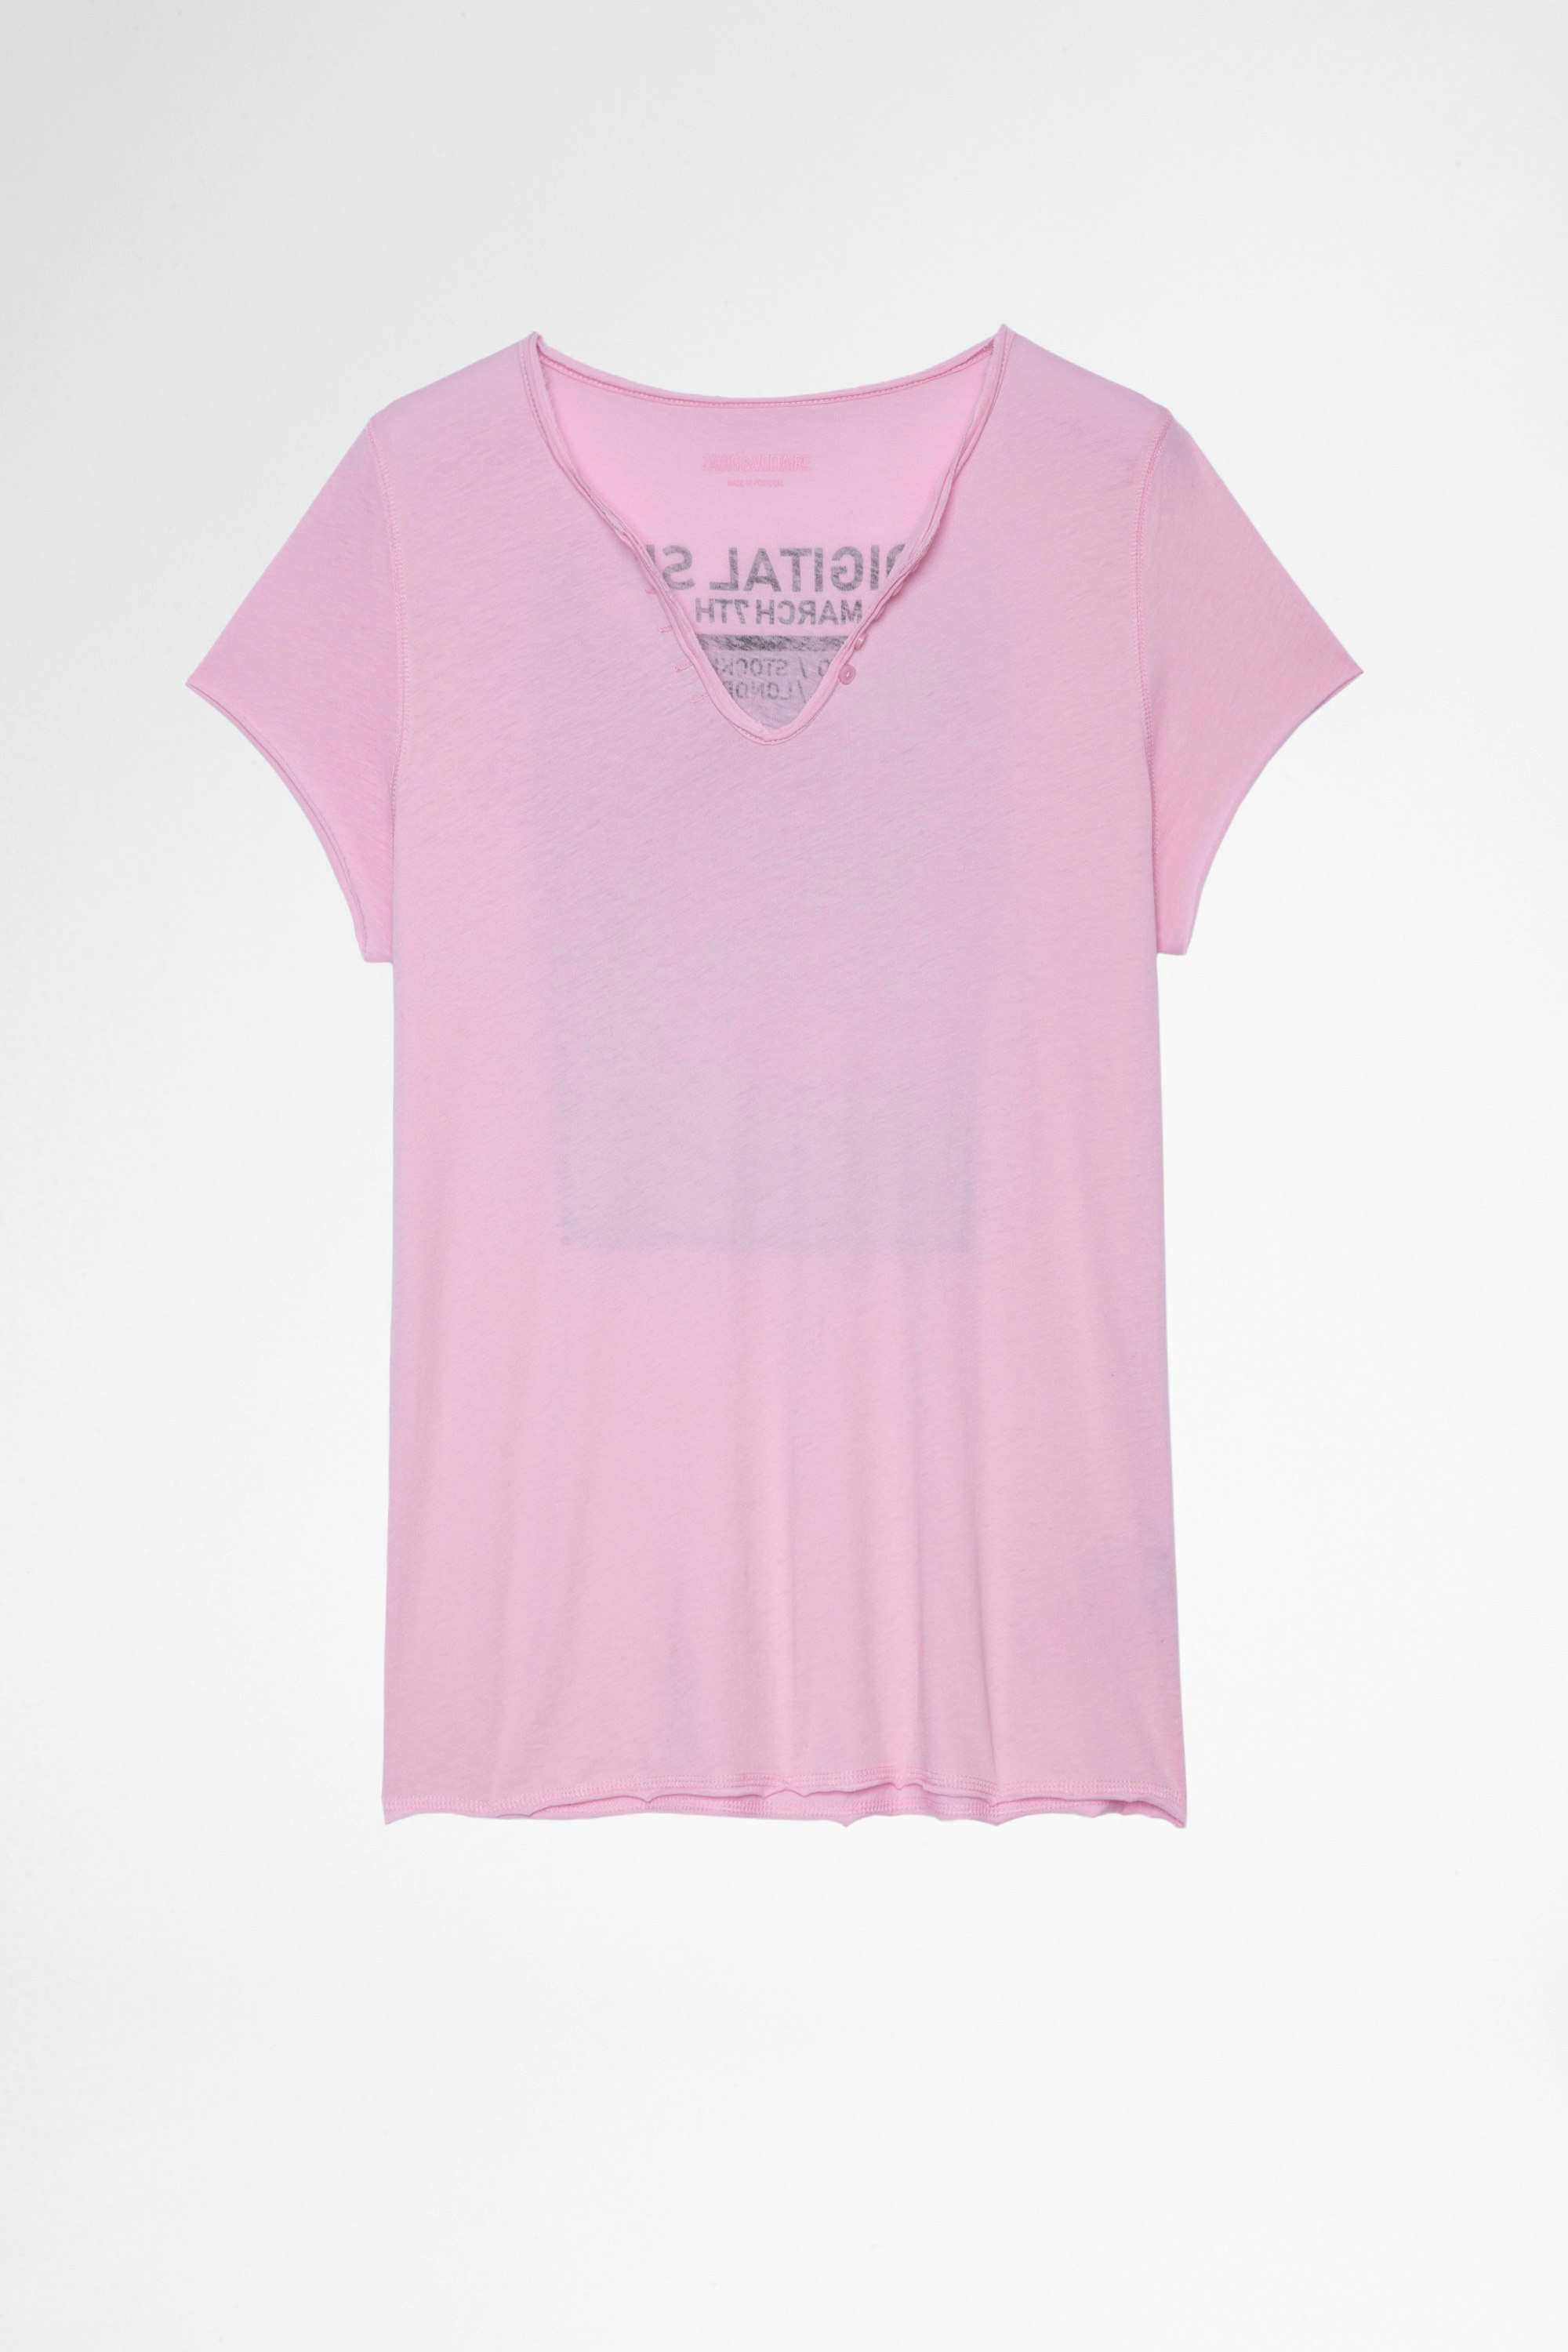 Photoprint Henley Ｔシャツ Women's pink cotton Henley t-shirt with photo print on the back. Made with fibers from organic farming.